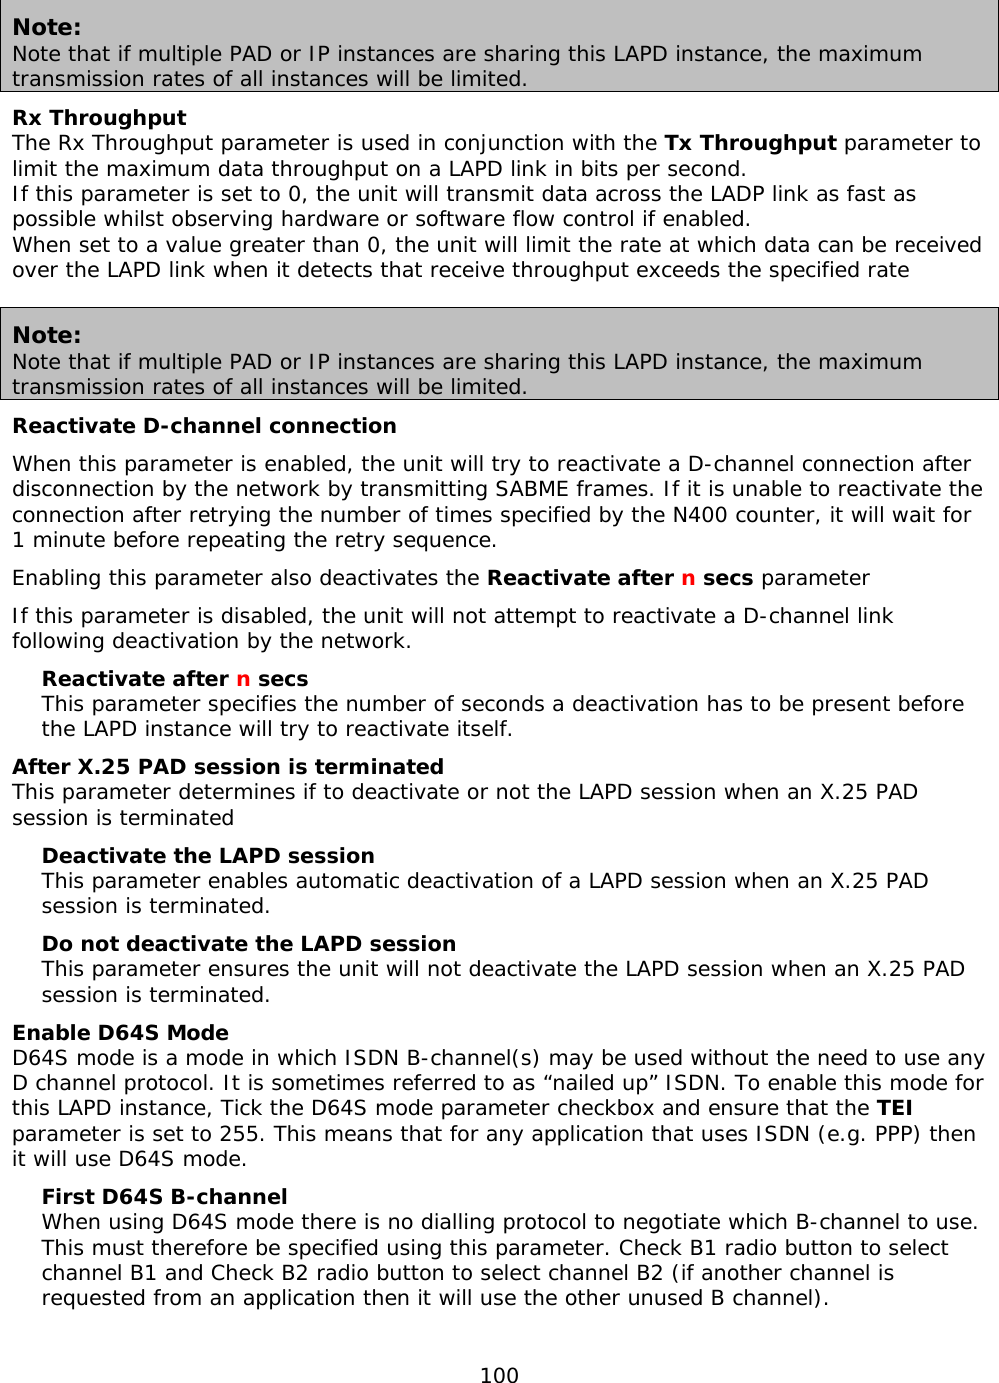 100  Note: Note that if multiple PAD or IP instances are sharing this LAPD instance, the maximum transmission rates of all instances will be limited. Rx Throughput The Rx Throughput parameter is used in conjunction with the Tx Throughput parameter to limit the maximum data throughput on a LAPD link in bits per second. If this parameter is set to 0, the unit will transmit data across the LADP link as fast as possible whilst observing hardware or software flow control if enabled. When set to a value greater than 0, the unit will limit the rate at which data can be received over the LAPD link when it detects that receive throughput exceeds the specified rate  Note: Note that if multiple PAD or IP instances are sharing this LAPD instance, the maximum transmission rates of all instances will be limited. Reactivate D-channel connection When this parameter is enabled, the unit will try to reactivate a D-channel connection after disconnection by the network by transmitting SABME frames. If it is unable to reactivate the connection after retrying the number of times specified by the N400 counter, it will wait for 1 minute before repeating the retry sequence. Enabling this parameter also deactivates the Reactivate after n secs parameter If this parameter is disabled, the unit will not attempt to reactivate a D-channel link following deactivation by the network. Reactivate after n secs This parameter specifies the number of seconds a deactivation has to be present before the LAPD instance will try to reactivate itself. After X.25 PAD session is terminated This parameter determines if to deactivate or not the LAPD session when an X.25 PAD session is terminated Deactivate the LAPD session This parameter enables automatic deactivation of a LAPD session when an X.25 PAD session is terminated. Do not deactivate the LAPD session This parameter ensures the unit will not deactivate the LAPD session when an X.25 PAD session is terminated. Enable D64S Mode D64S mode is a mode in which ISDN B-channel(s) may be used without the need to use any D channel protocol. It is sometimes referred to as “nailed up” ISDN. To enable this mode for this LAPD instance, Tick the D64S mode parameter checkbox and ensure that the TEI parameter is set to 255. This means that for any application that uses ISDN (e.g. PPP) then it will use D64S mode. First D64S B-channel When using D64S mode there is no dialling protocol to negotiate which B-channel to use. This must therefore be specified using this parameter. Check B1 radio button to select channel B1 and Check B2 radio button to select channel B2 (if another channel is requested from an application then it will use the other unused B channel).    